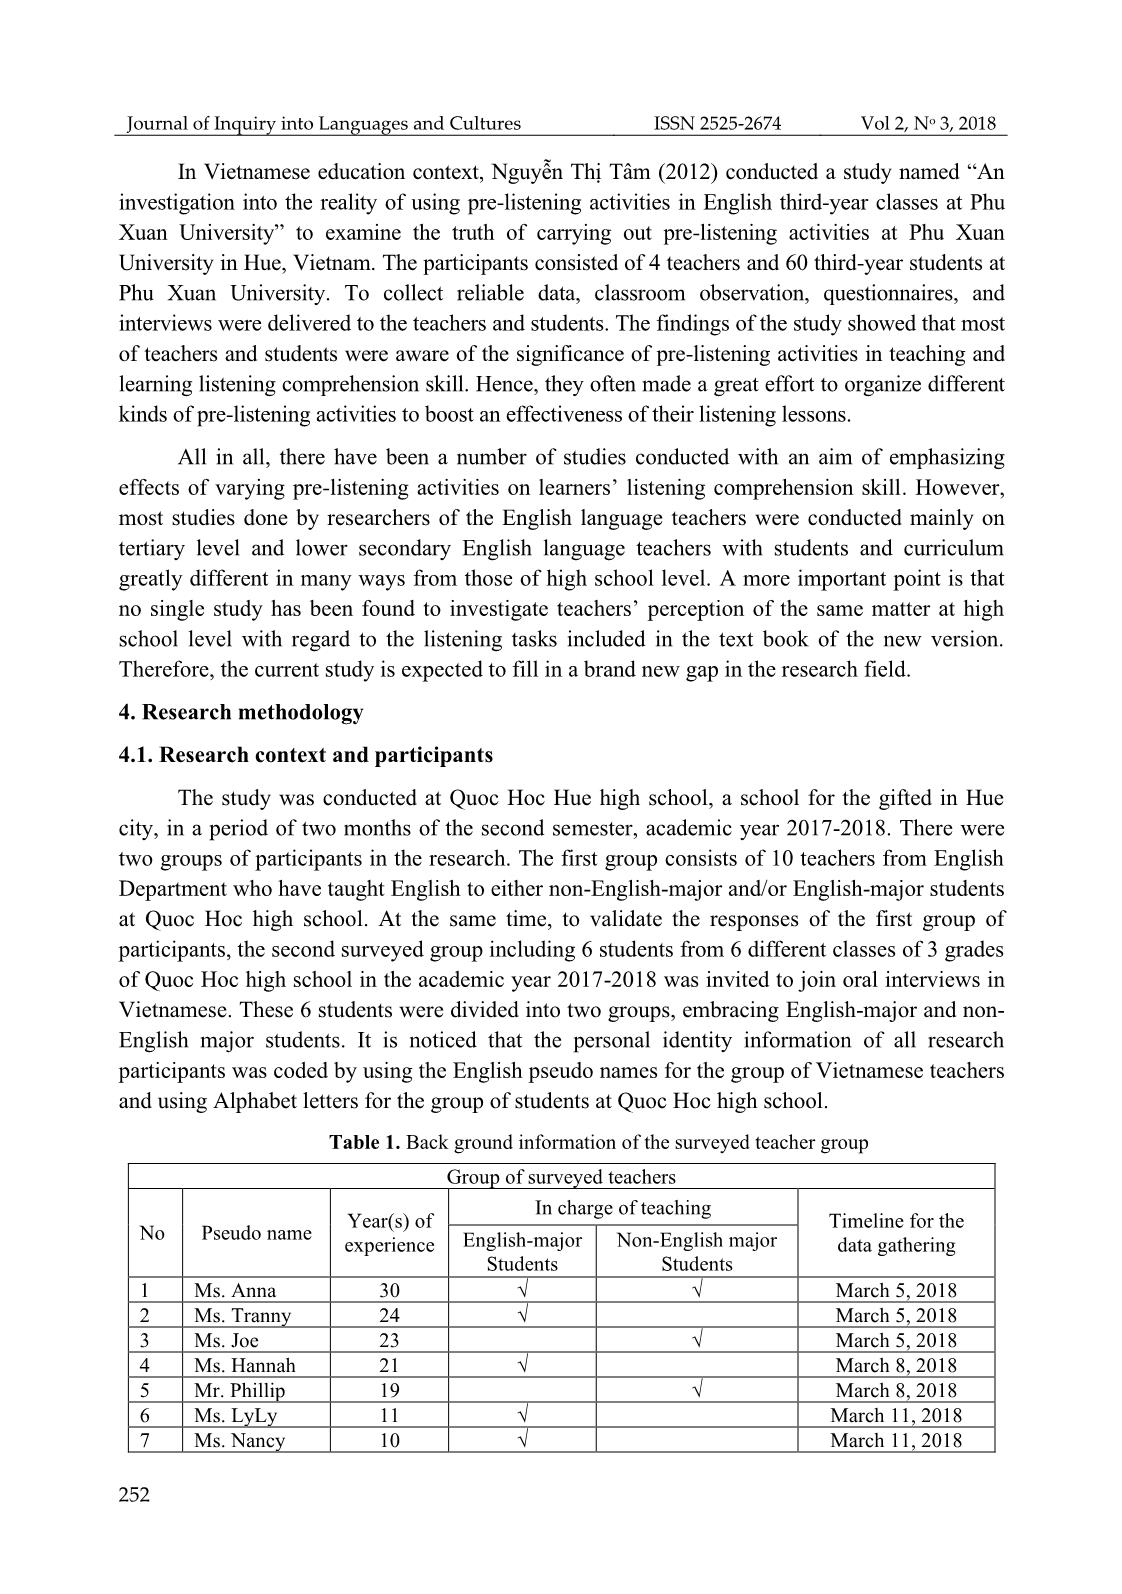 An investigation into efl teachers perceptions and practices of pre-Listening activities in english classes at Quoc Hoc Hue high school trang 4